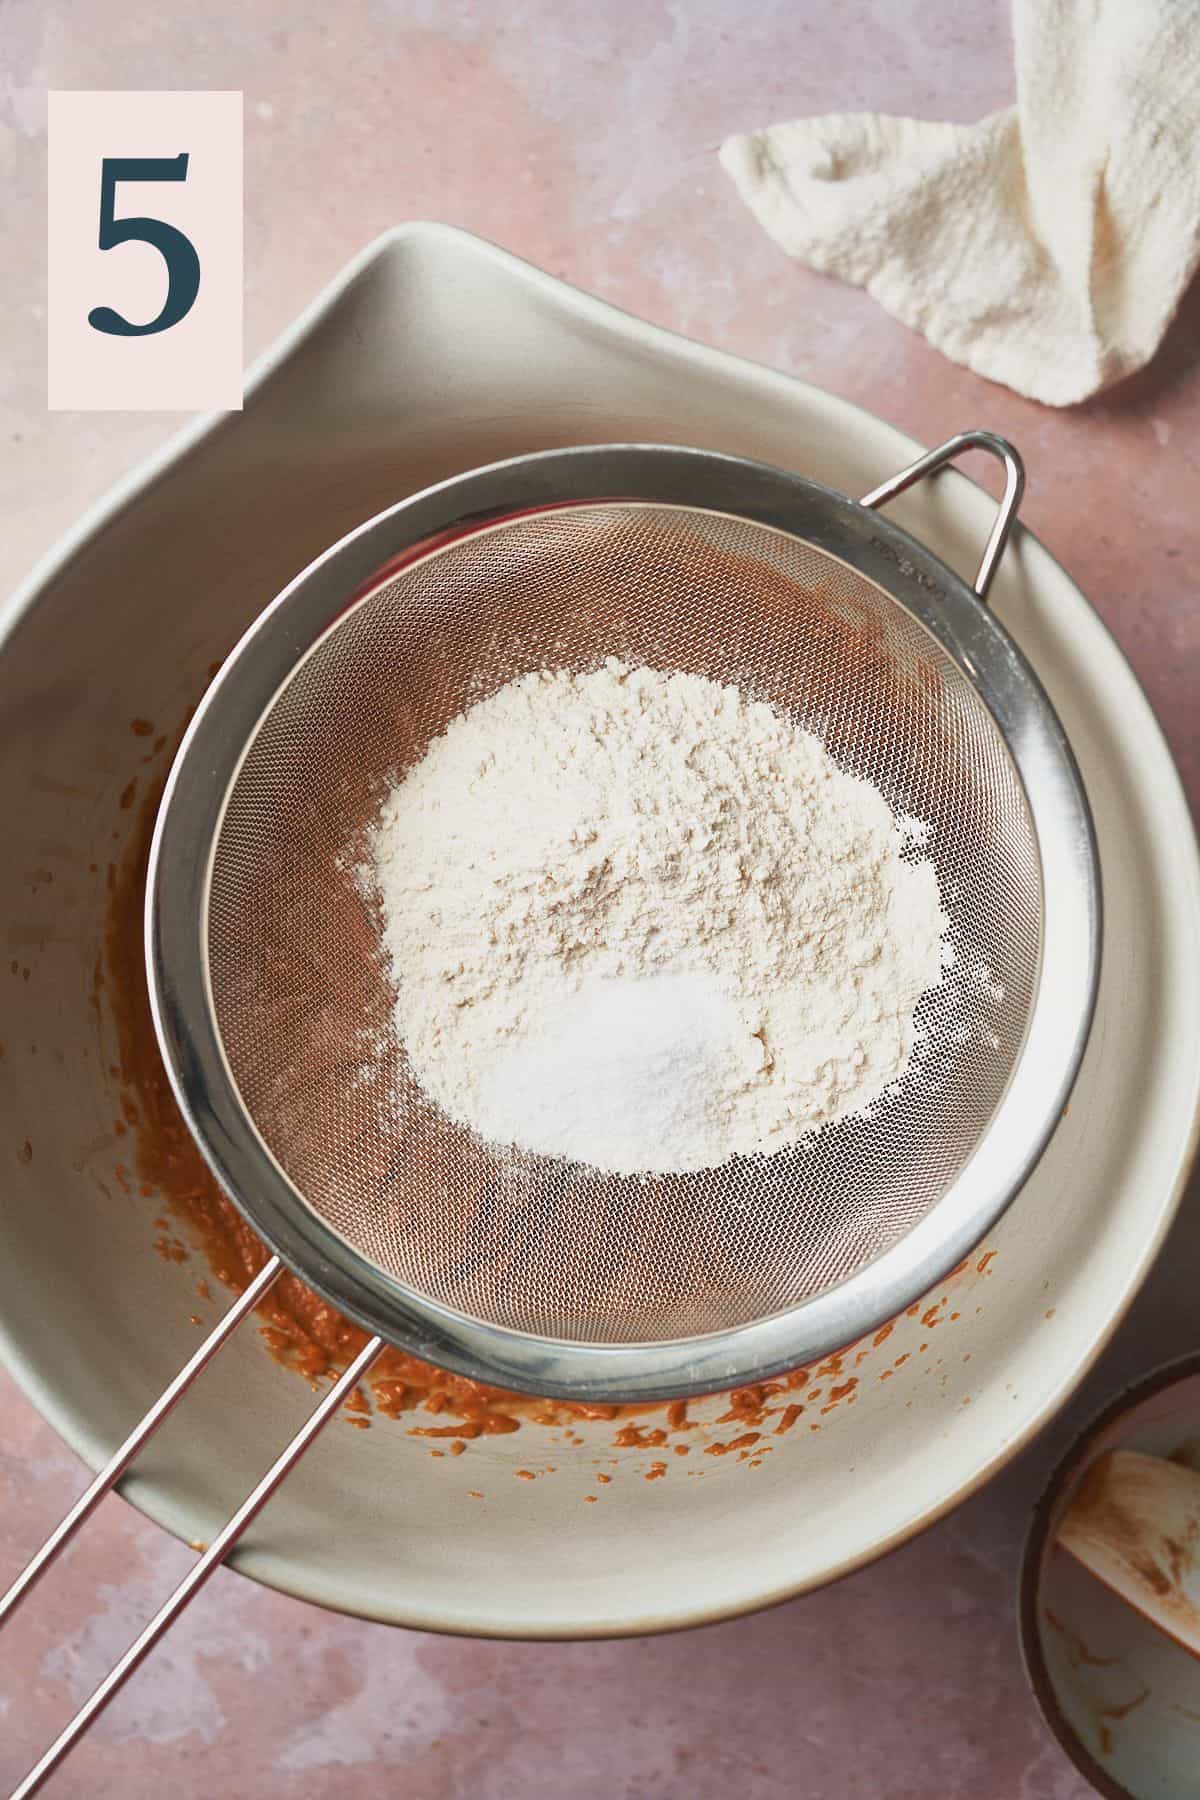 sifting flour, salt, and baking soda into a mixture with a metal sieve.